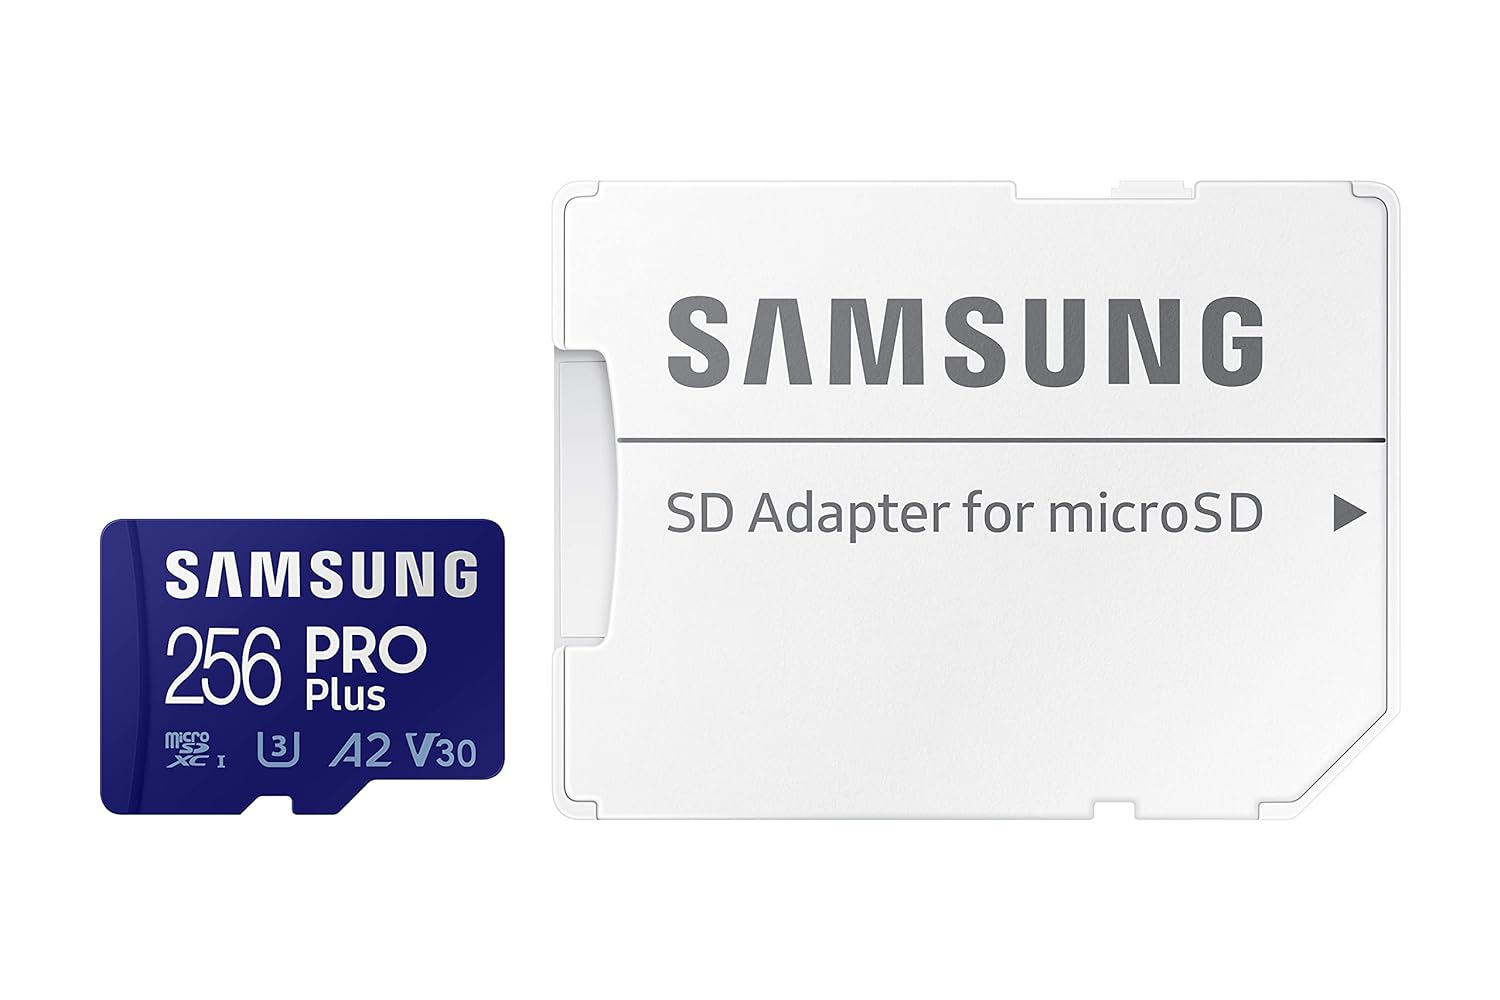 SAMSUNG Pro Plus Micro SD Memory Card + Adapter, 256GB microSDXC, Up to 160MB/s UHS-I, U3, A2, V30Full HD & 4K UHD, Expanded Storage for Phone, Gaming, Tablet, MB-MD256KA/AM